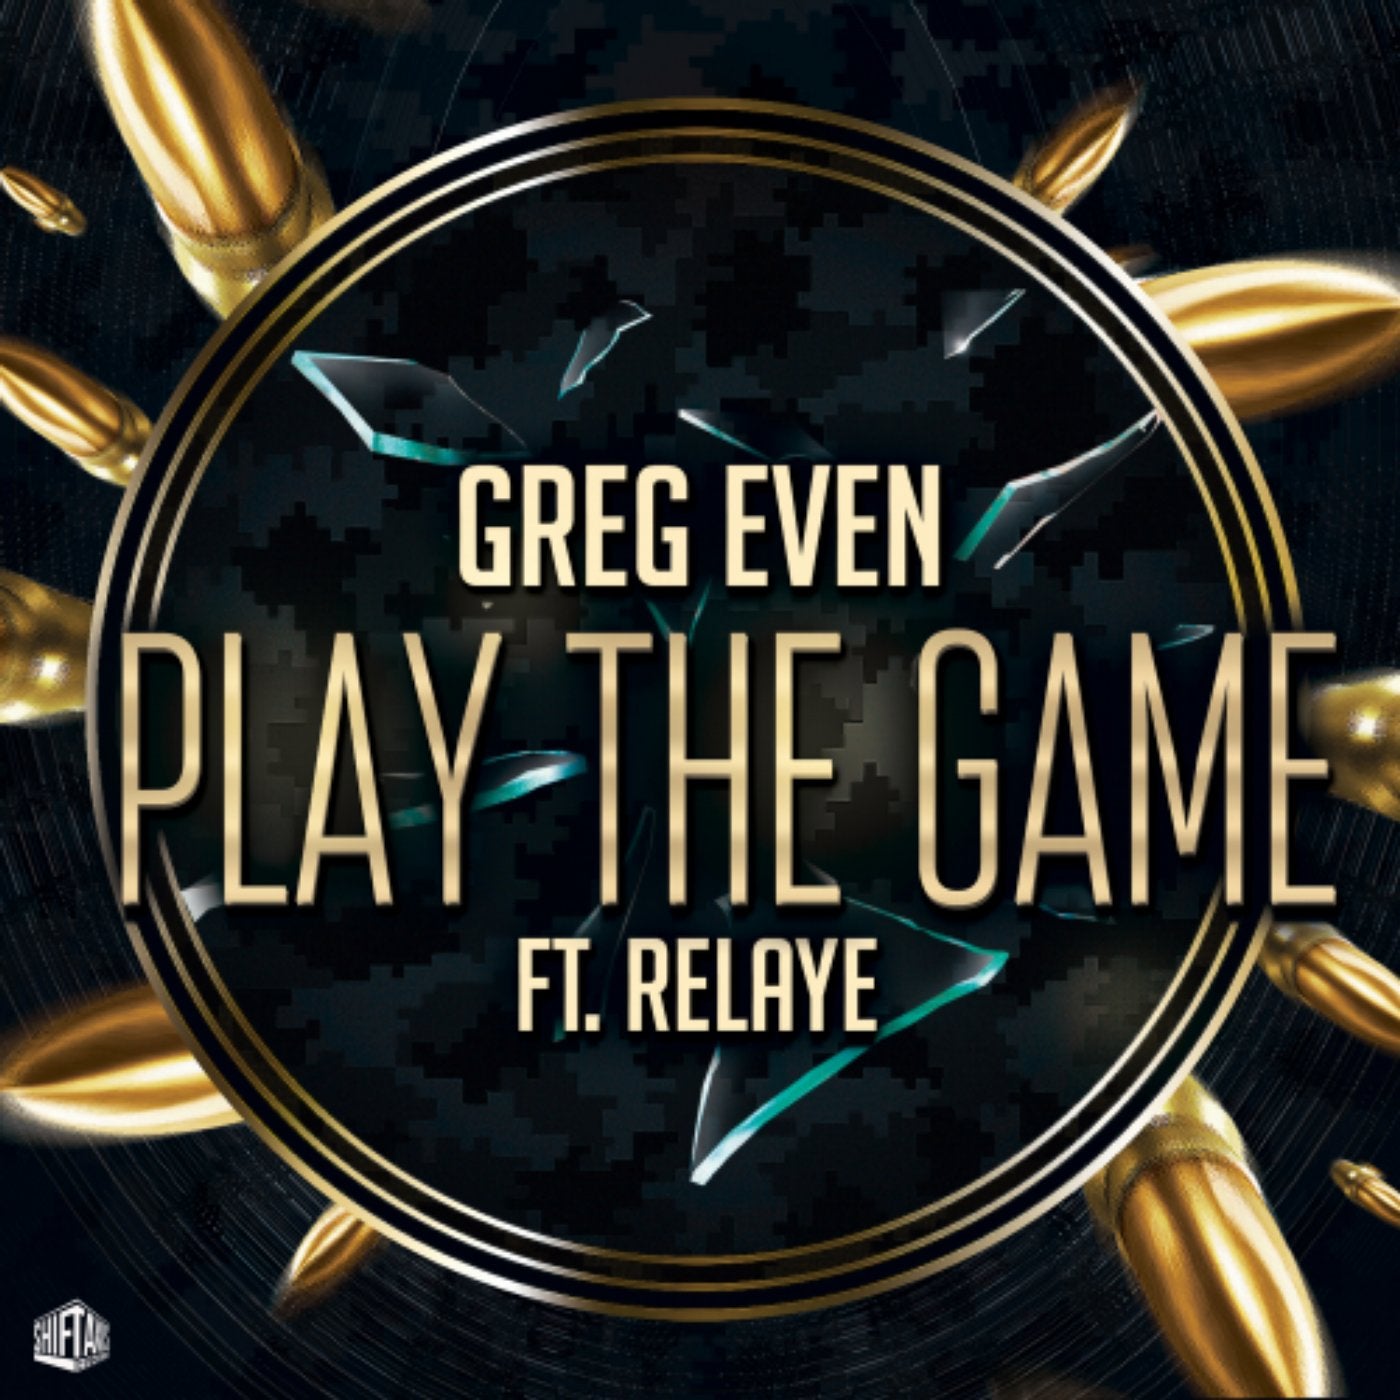 Play the game (feat. Relaye)